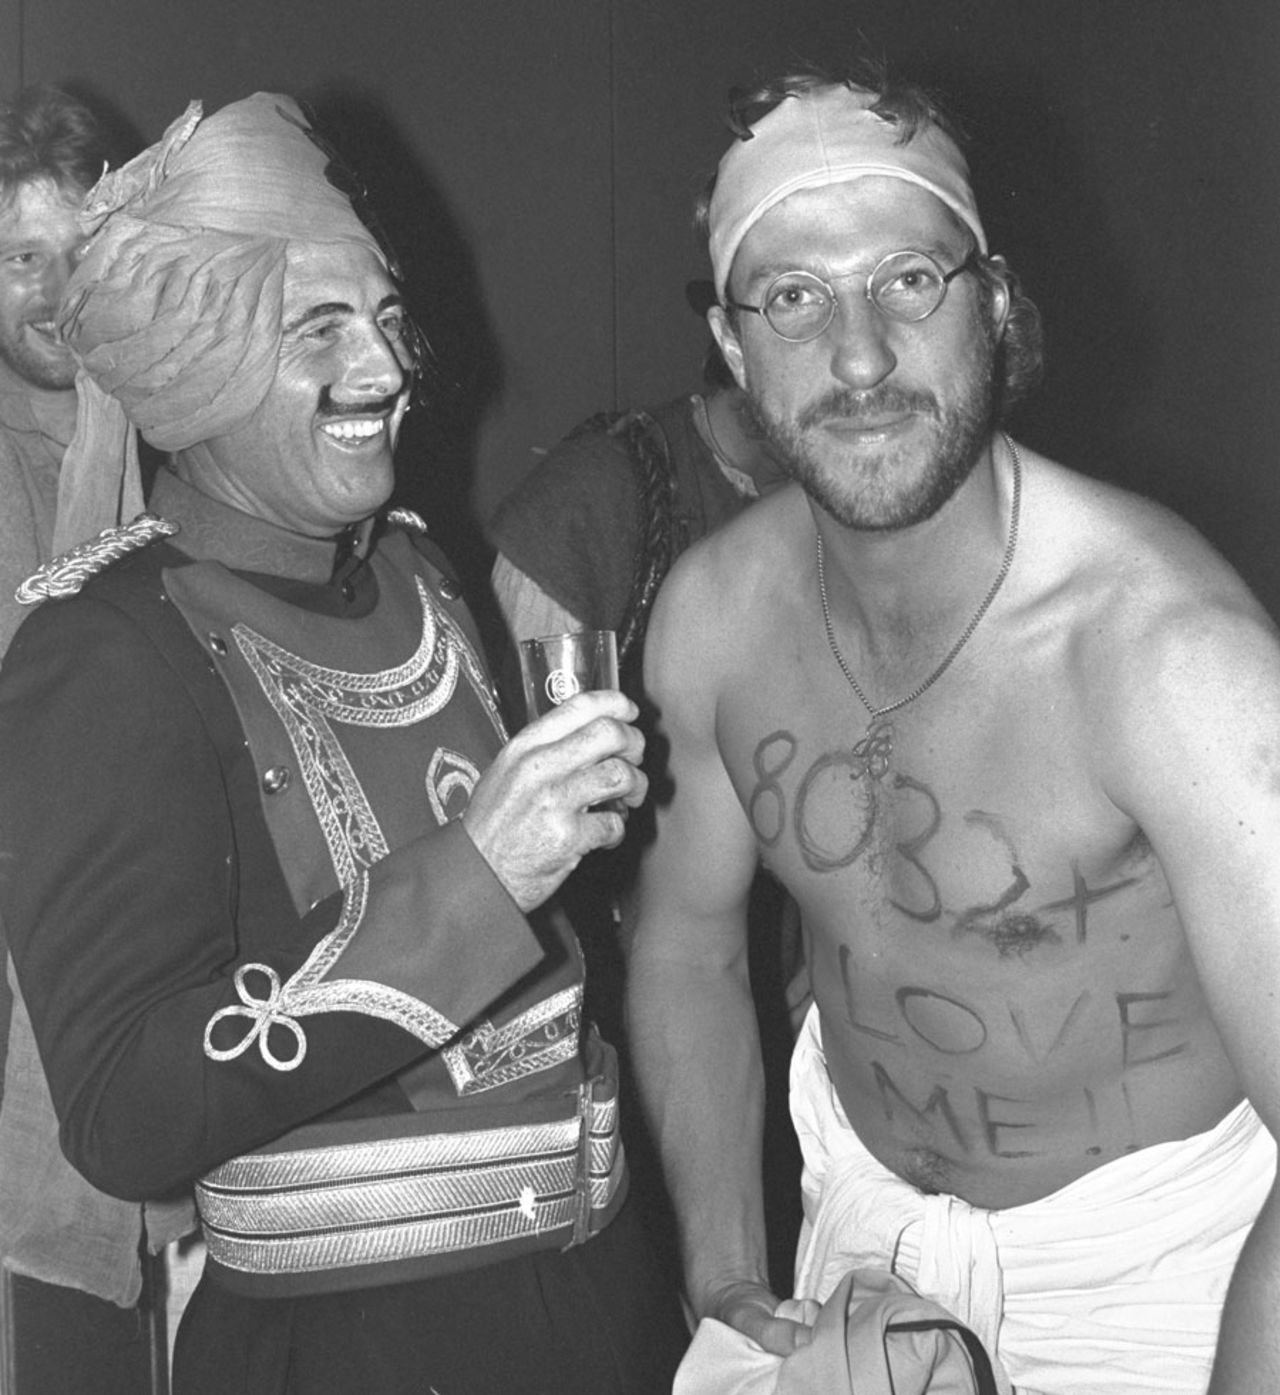 Ian Botham and Geoffrey Boycott at the England Christmas party in India.  Botham came dressed as Boycott, who had just broken the record for Test runs by an England player, December 1981